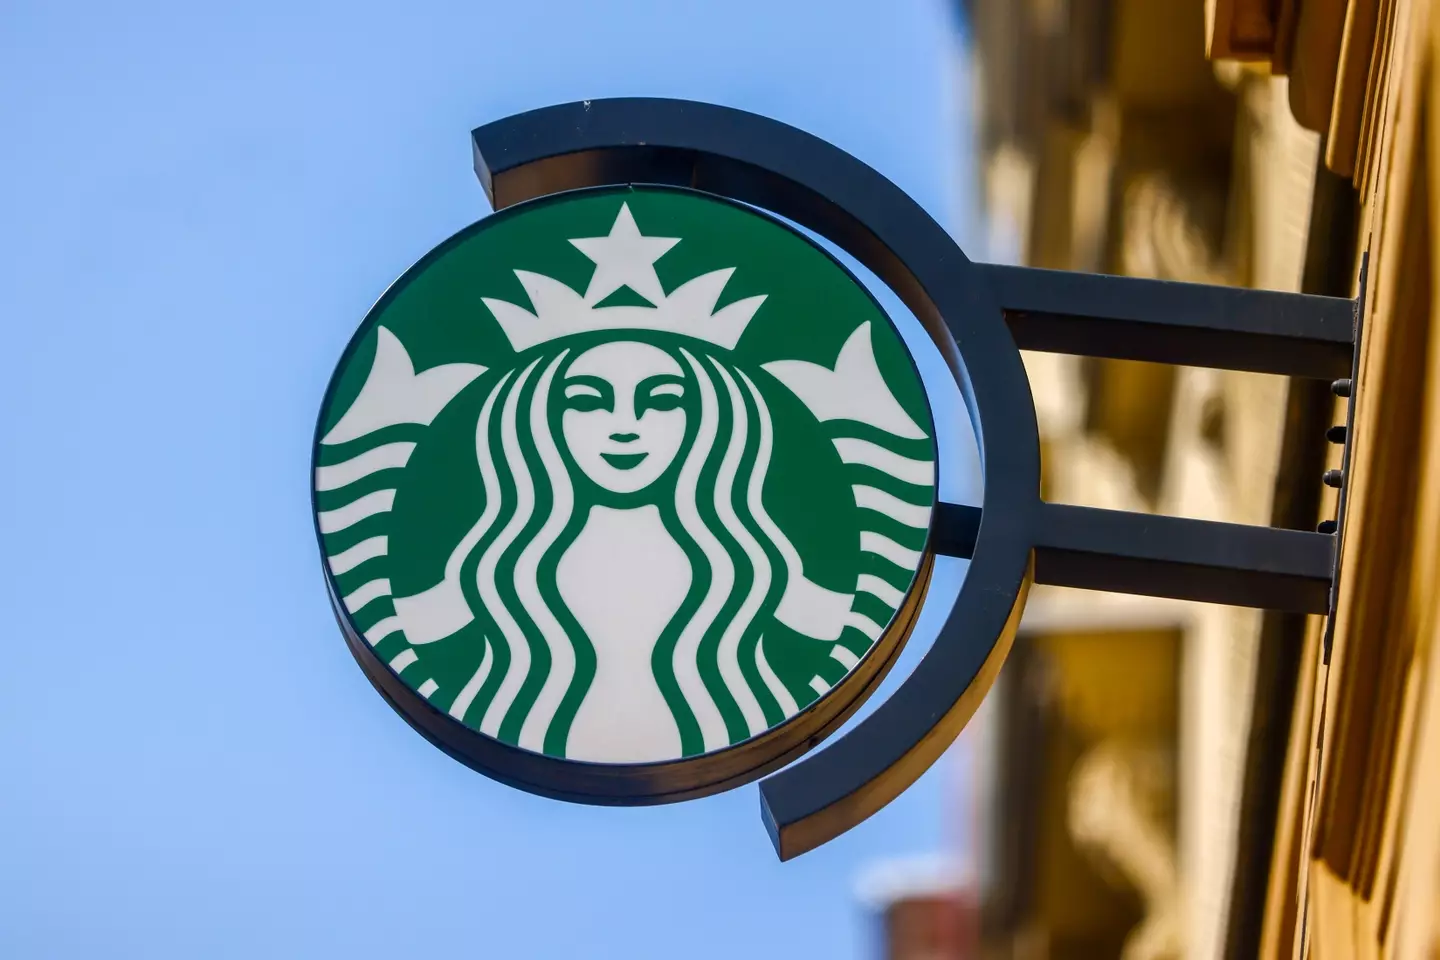 Starbucks have said they look forward to defending themselves against the lawsuit.